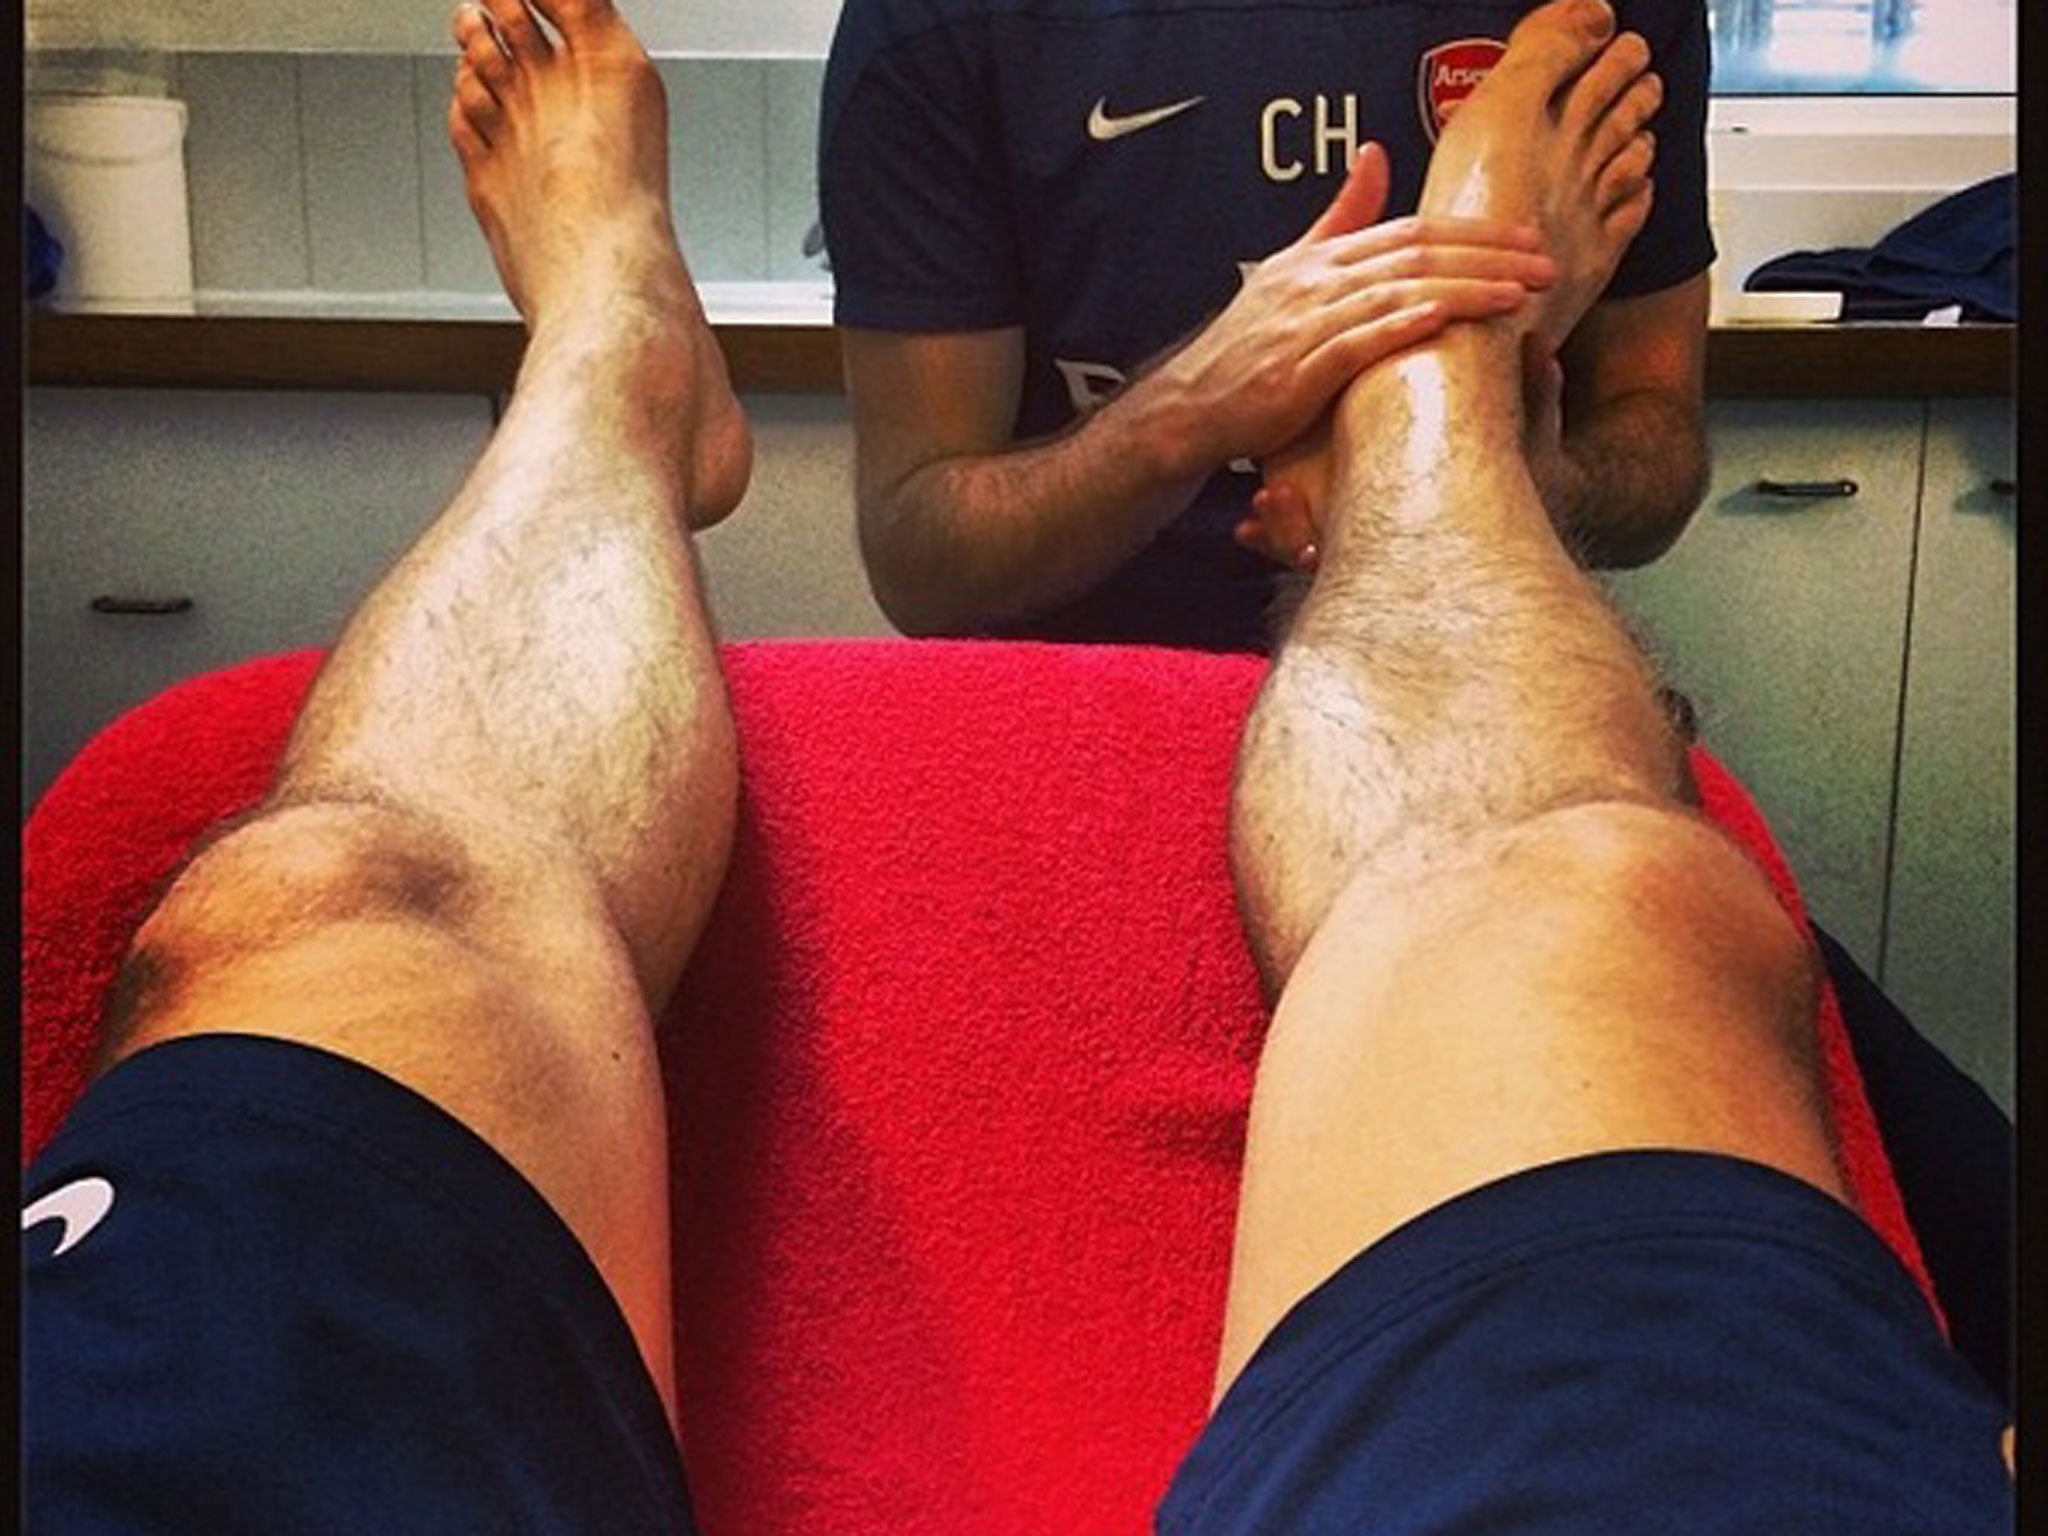 Nicklas Bendtner uploaded this picture today of him having treatment on his ankle